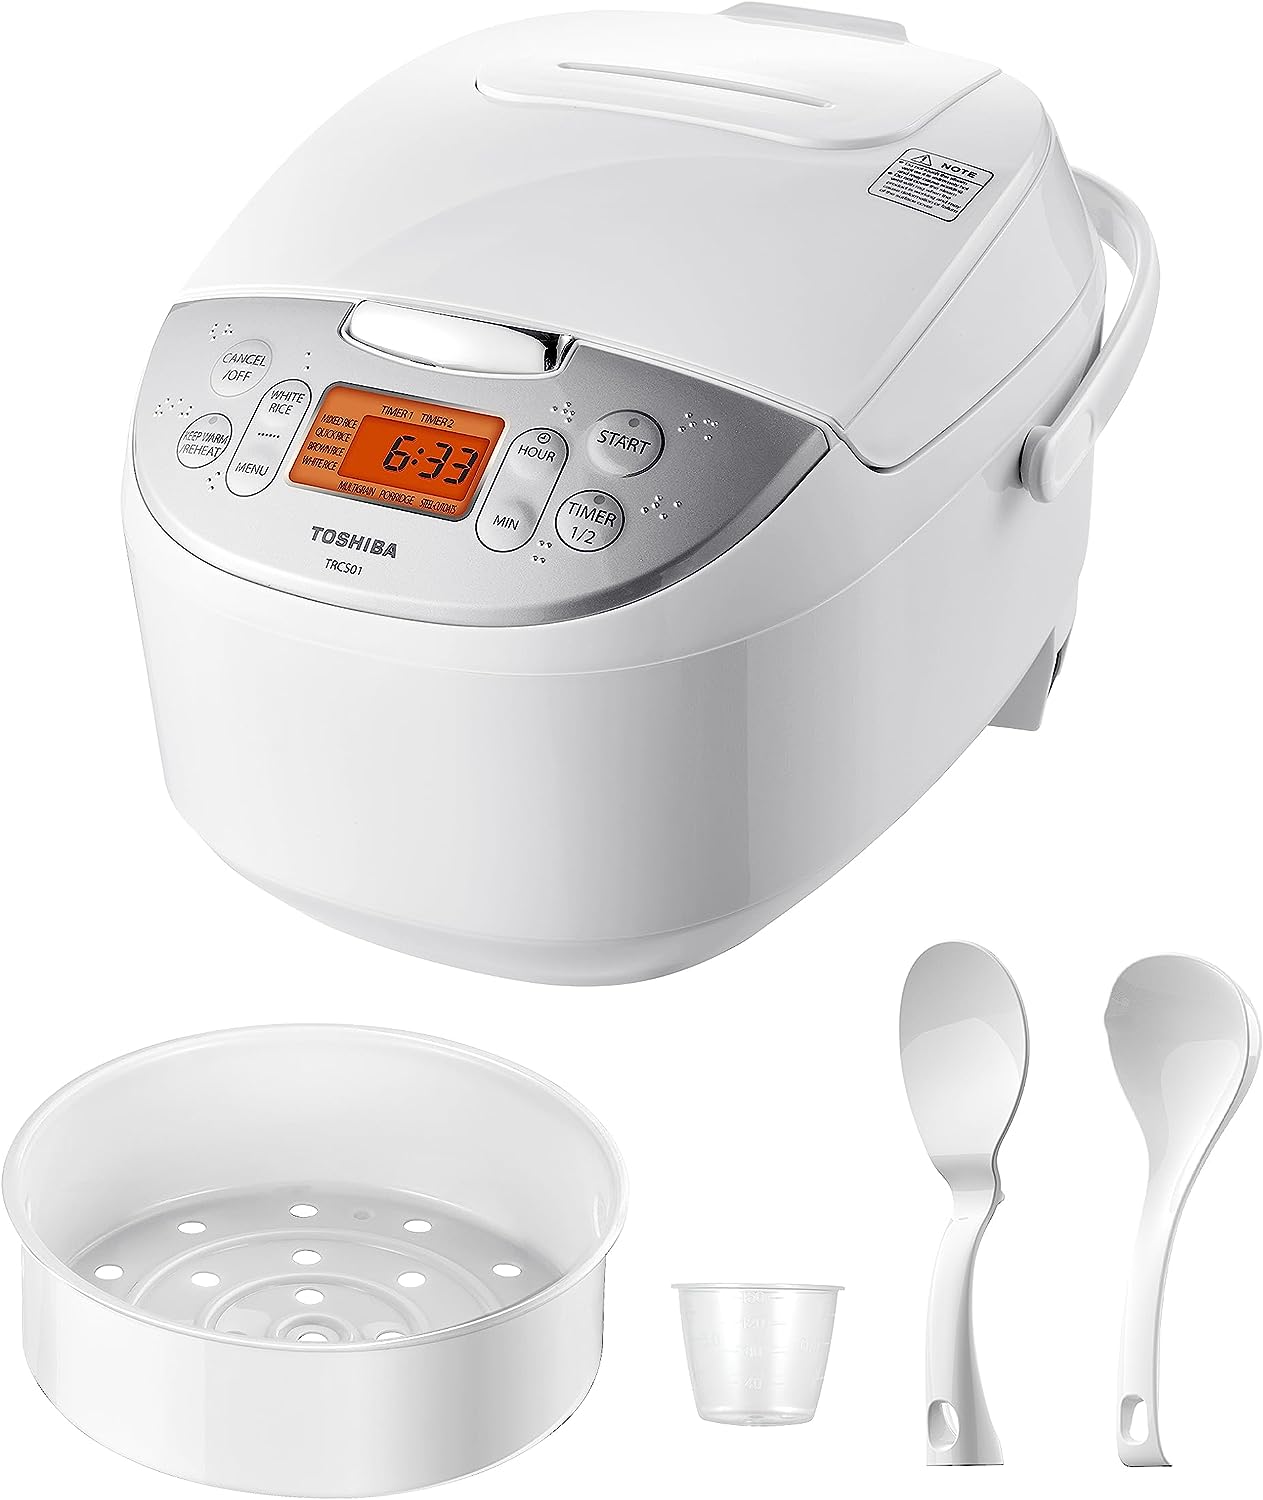 https://bigbigmart.com/wp-content/uploads/2023/08/Toshiba-Rice-Cooker-6-Cup-Uncooked-%E2%80%93-Japanese-Rice-Cooker-with-Fuzzy-Logic-Technology-7-Cooking-Functions-Digital-Display-2-Delay-Timers-and-Auto-Keep-Warm-Non-Stick-Inner-Pot-White.jpg